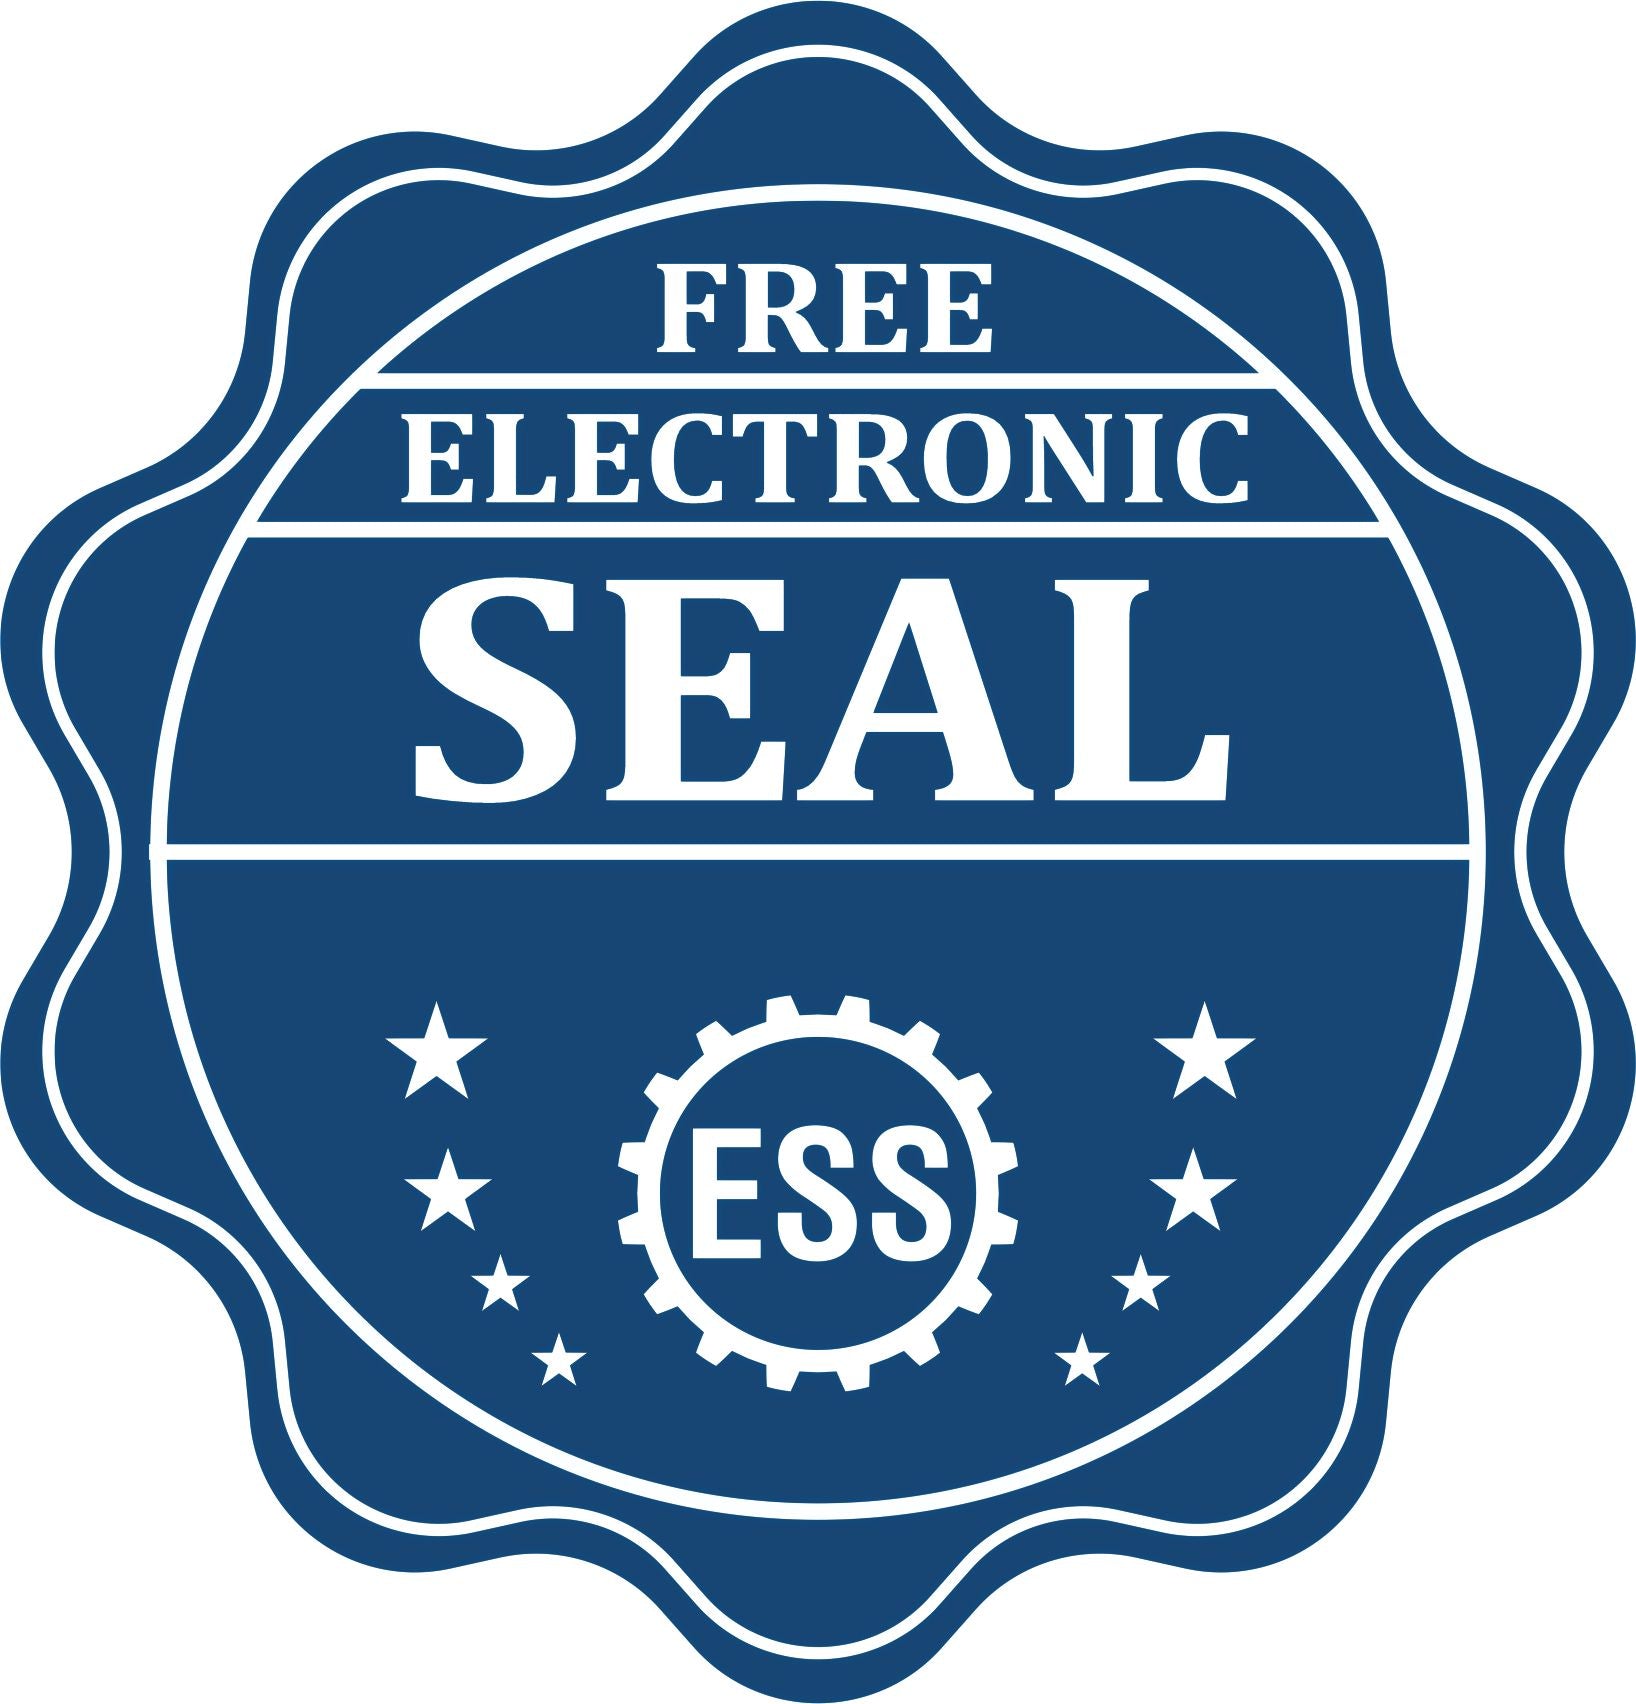 A badge showing a free electronic seal for the Premium MaxLight Pre-Inked New Hampshire Geology Stamp with stars and the ESS gear on the emblem.